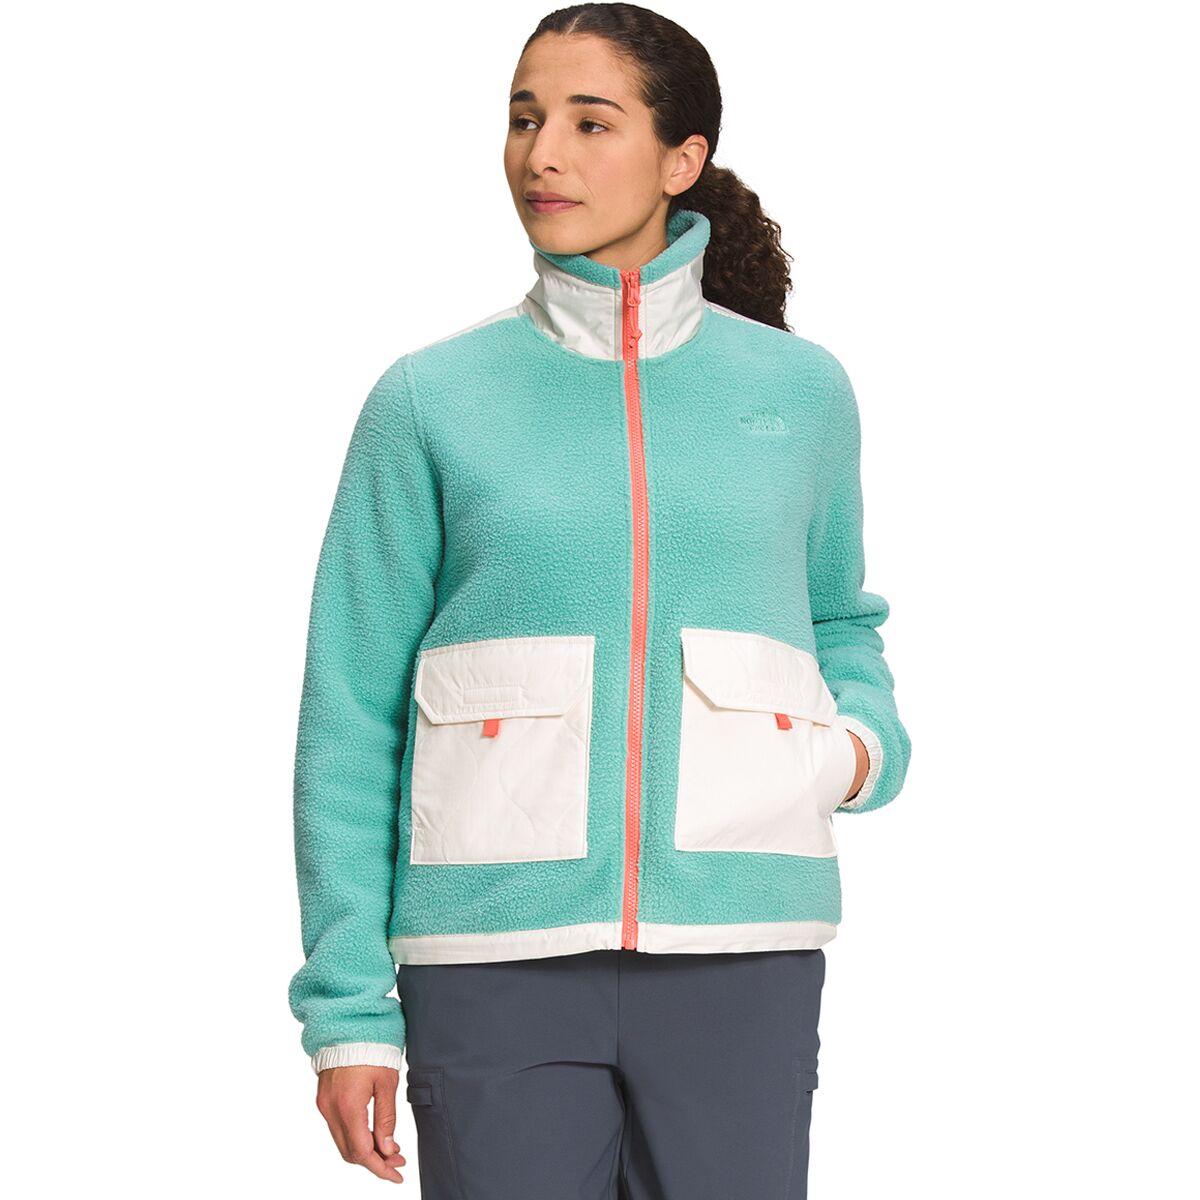 The North Face Royal Arch Full-Zip Jacket - Women's